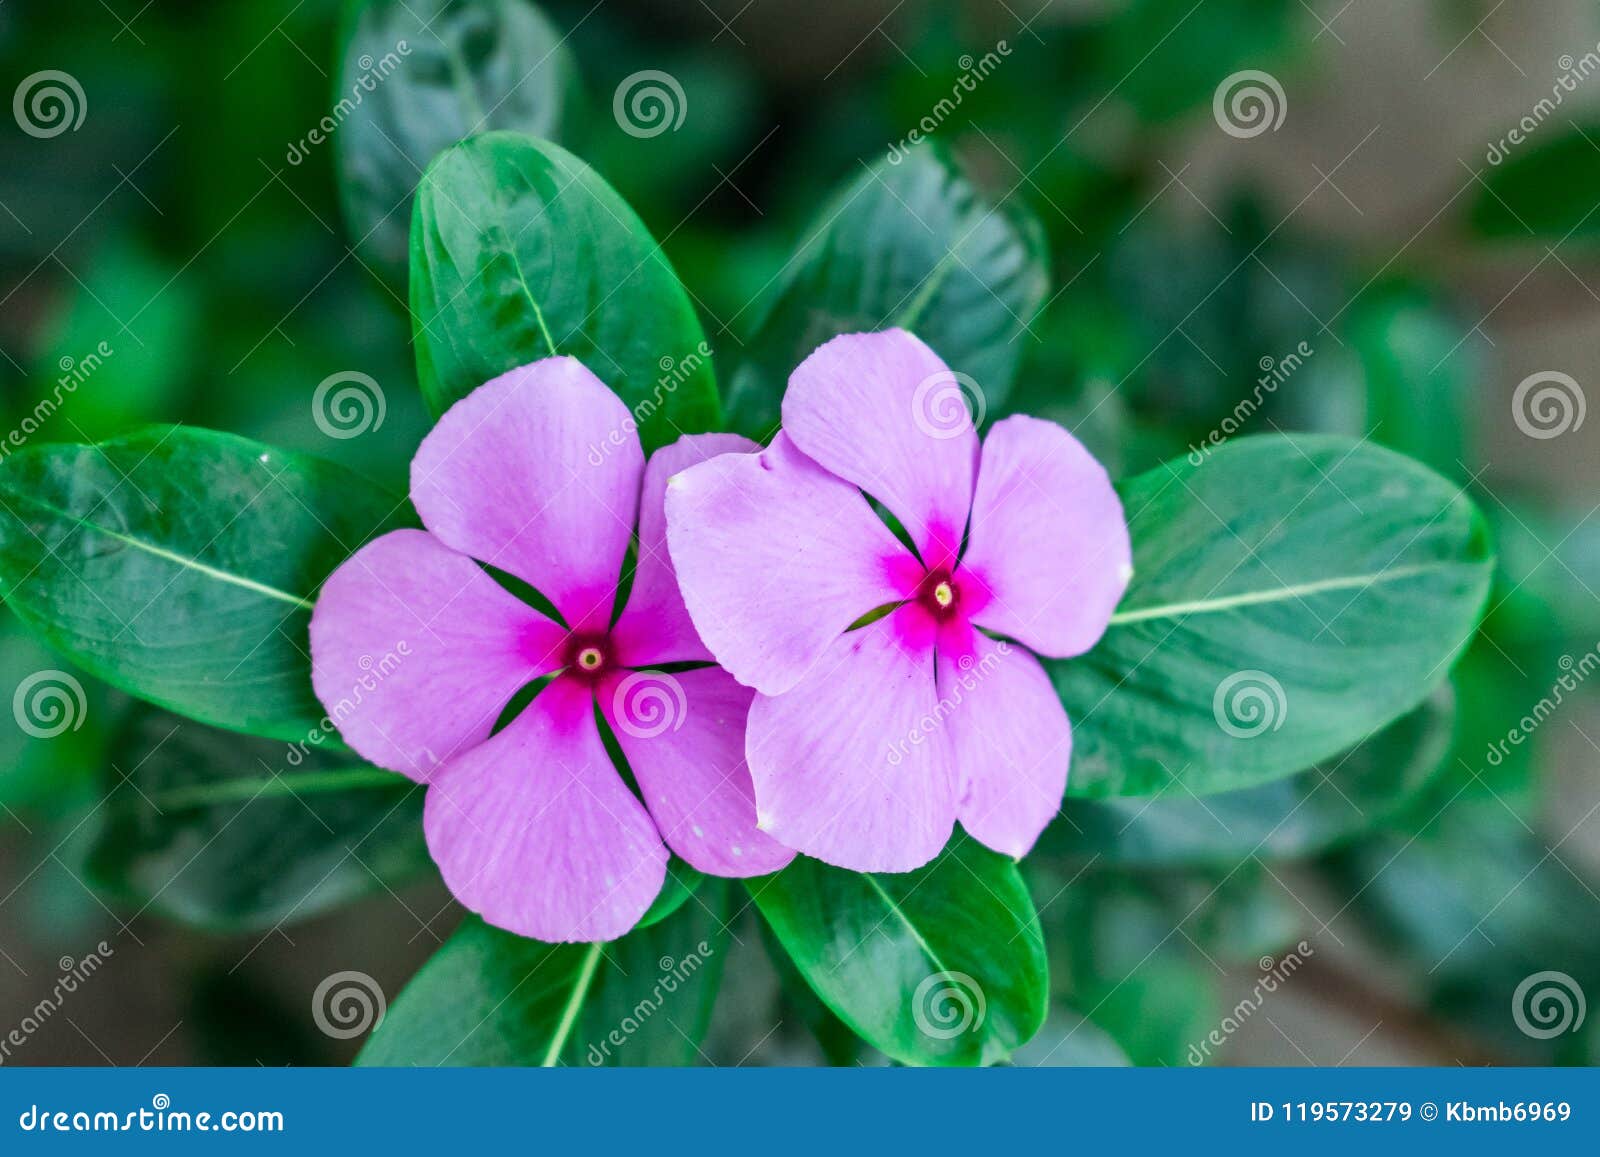 Indian Flower Madagascar Periwinkle Plant Close View At Rural